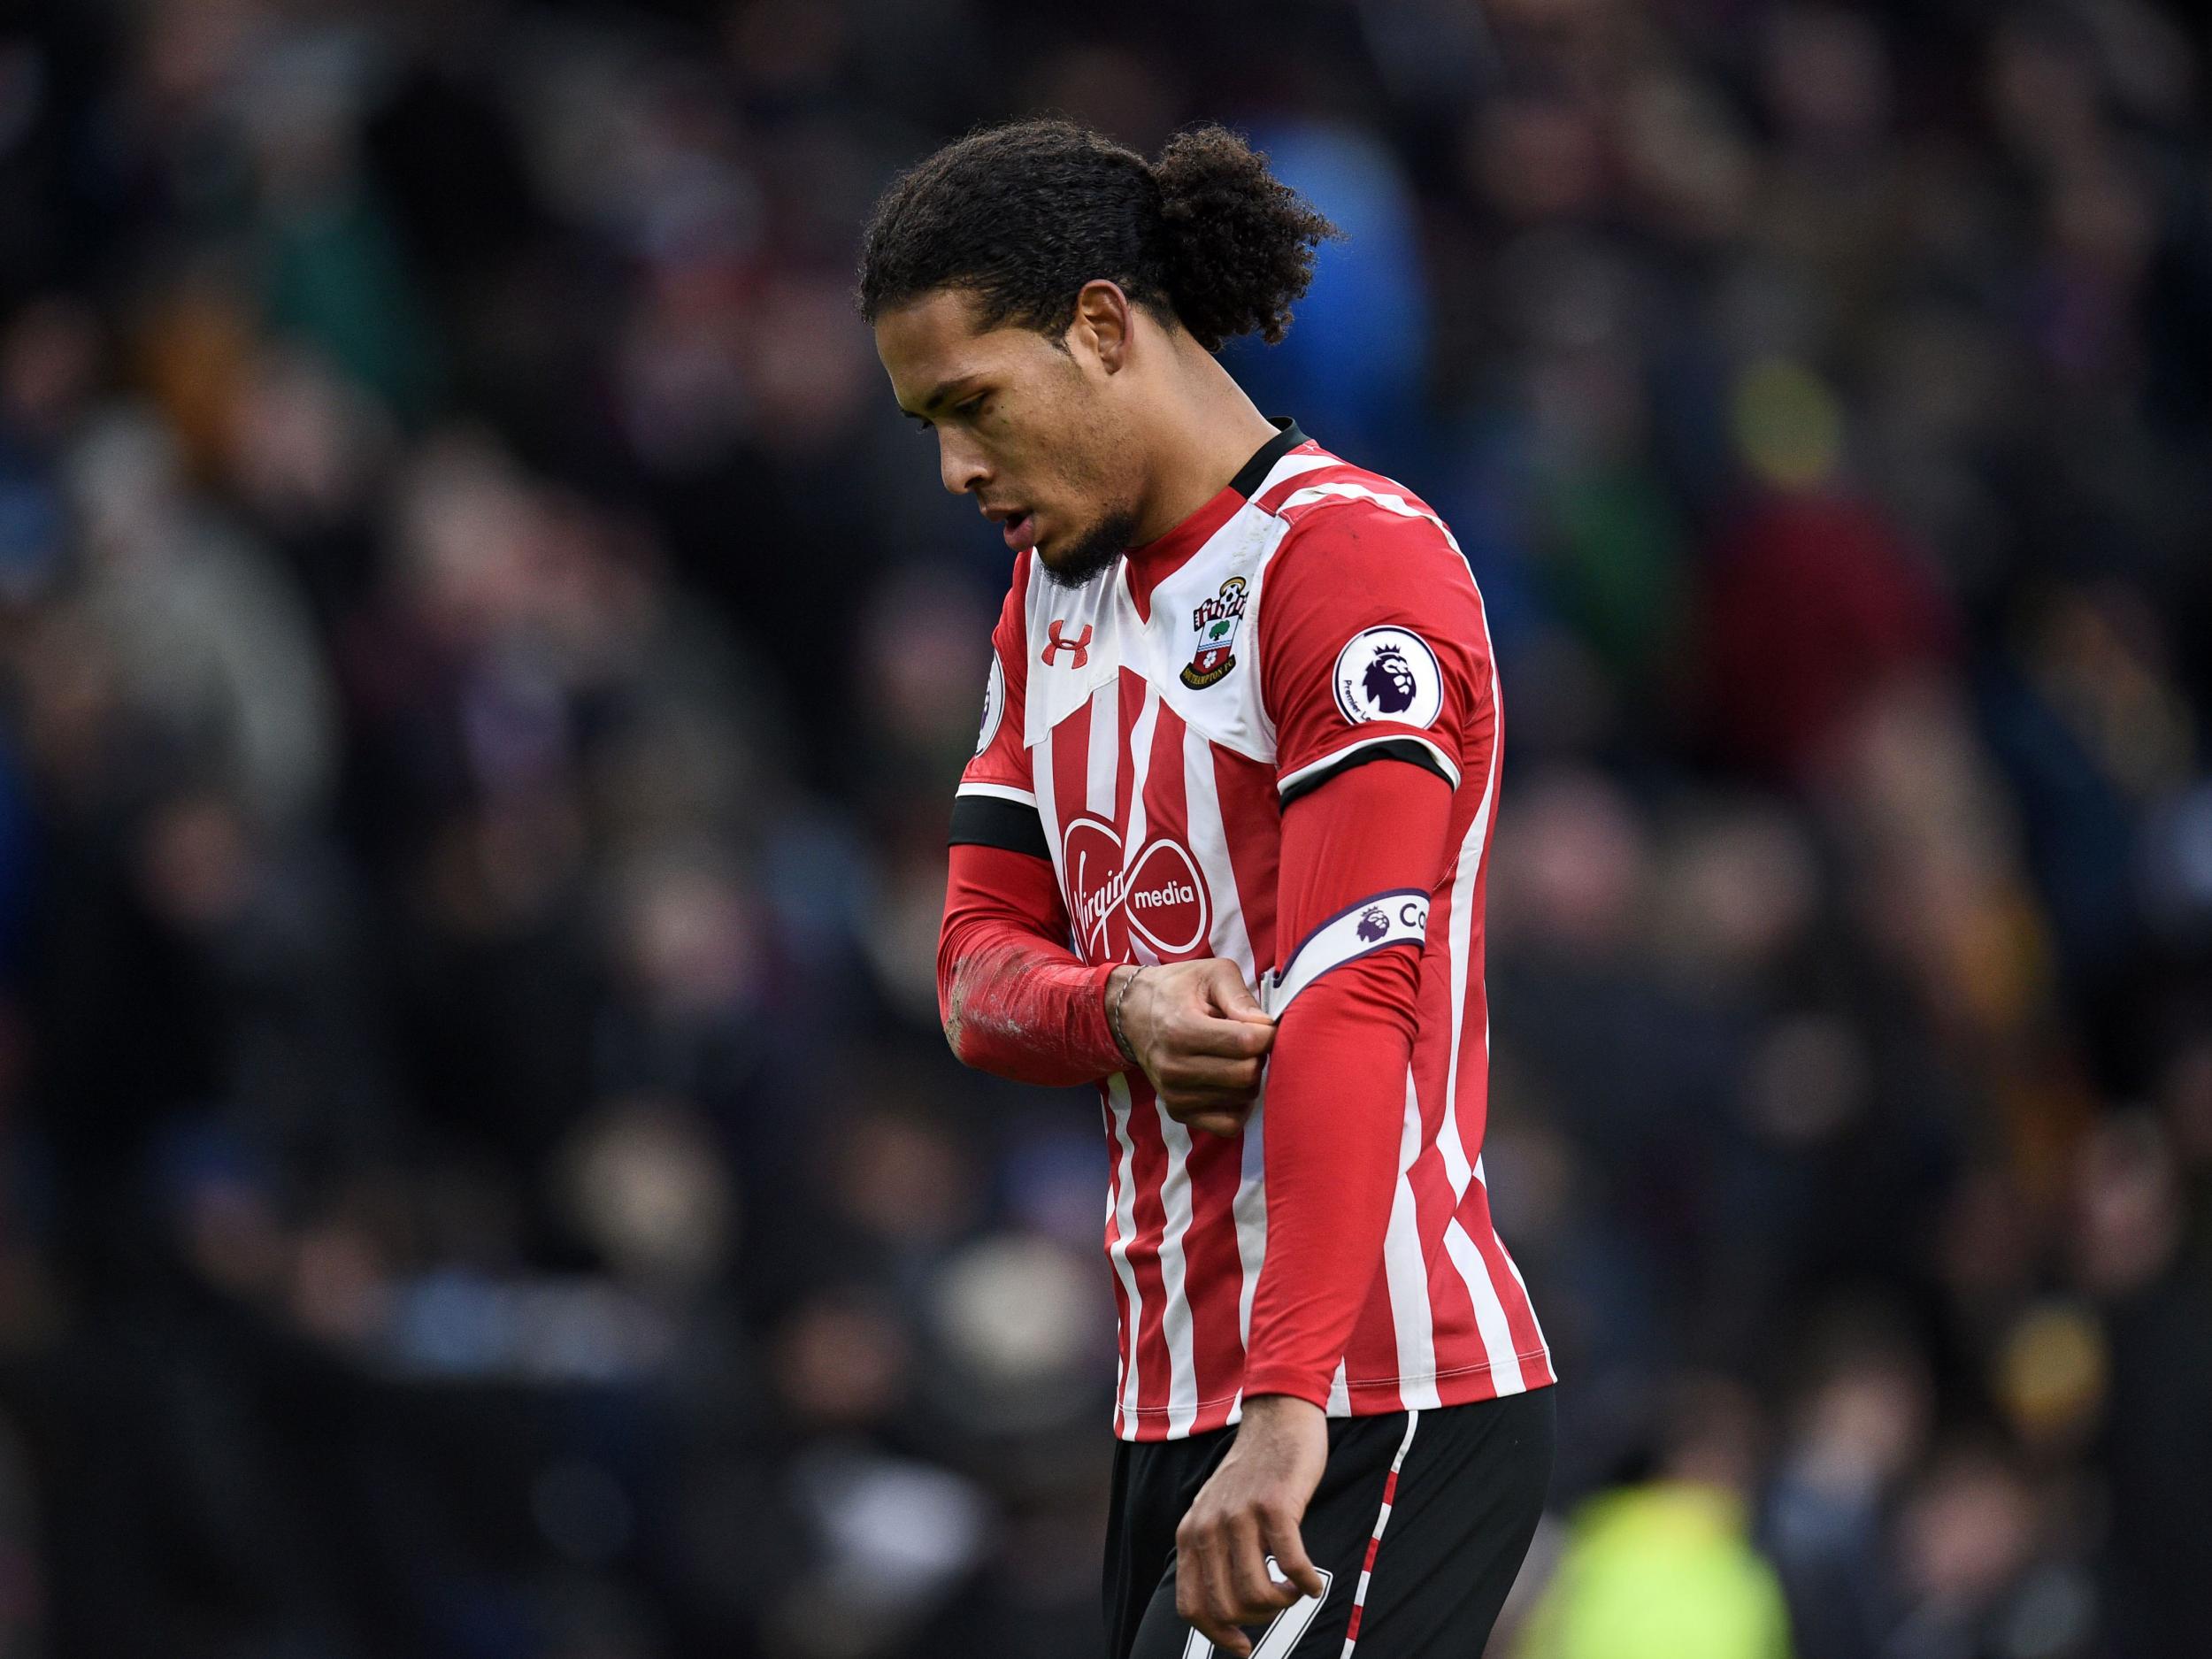 Le Tissier believes Southampton can make an example of Van Dijk